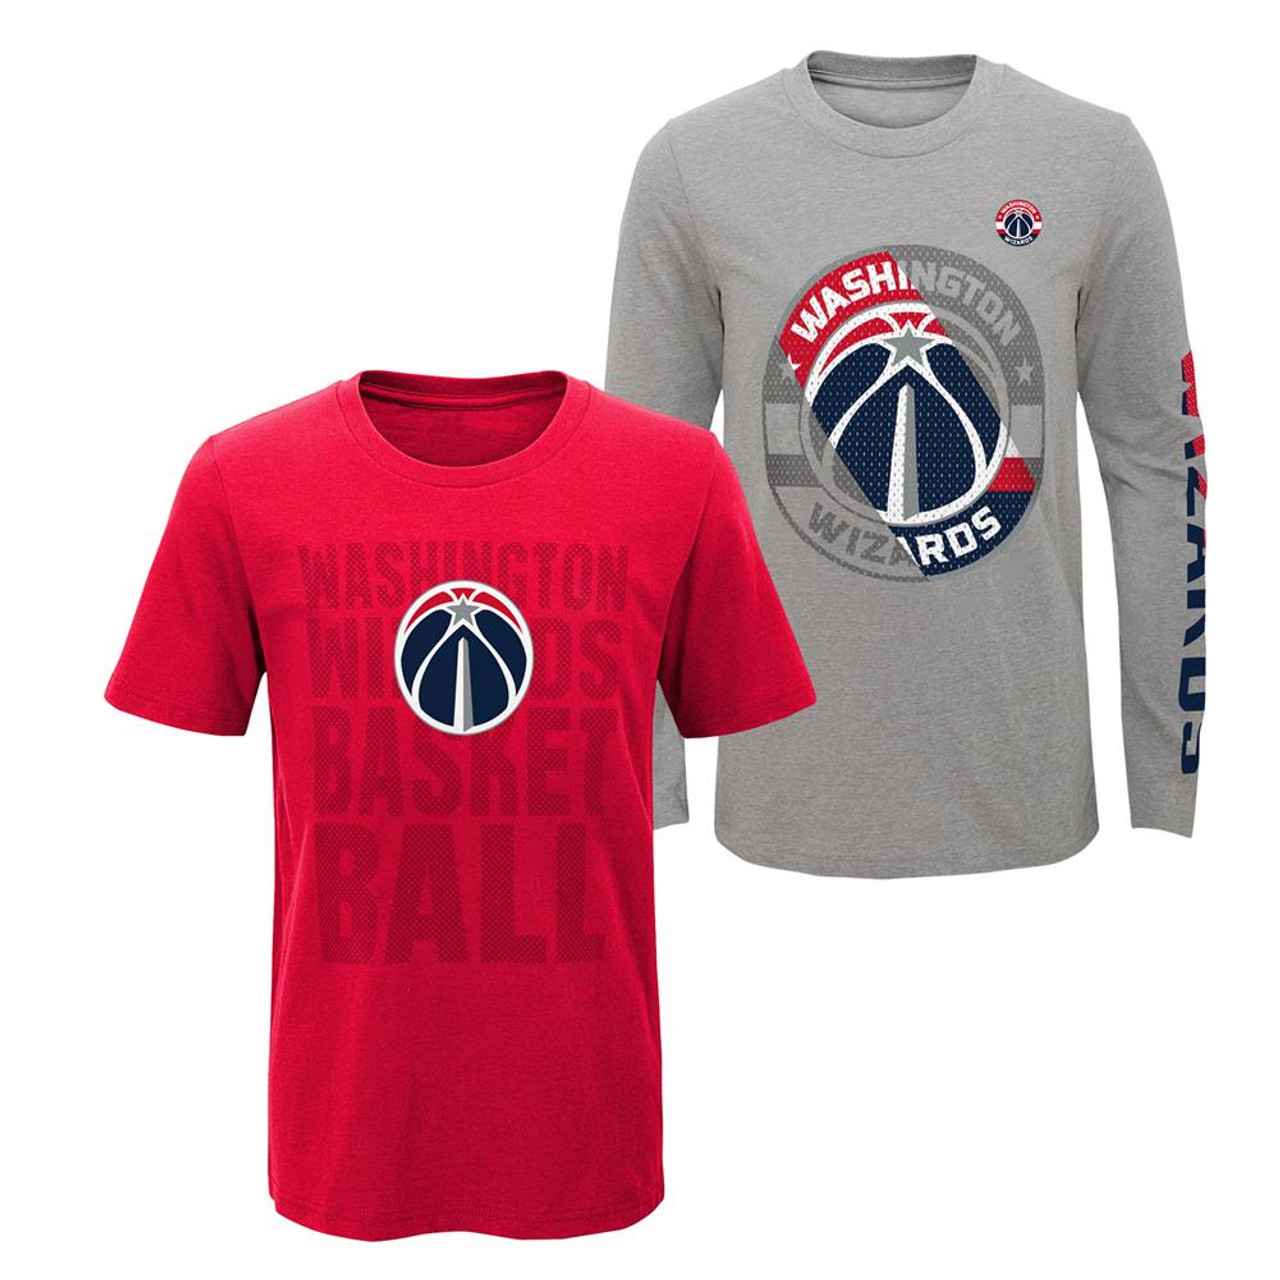 Official Washington Wizards T-Shirts, Wizards Tees, Wizards Shirts